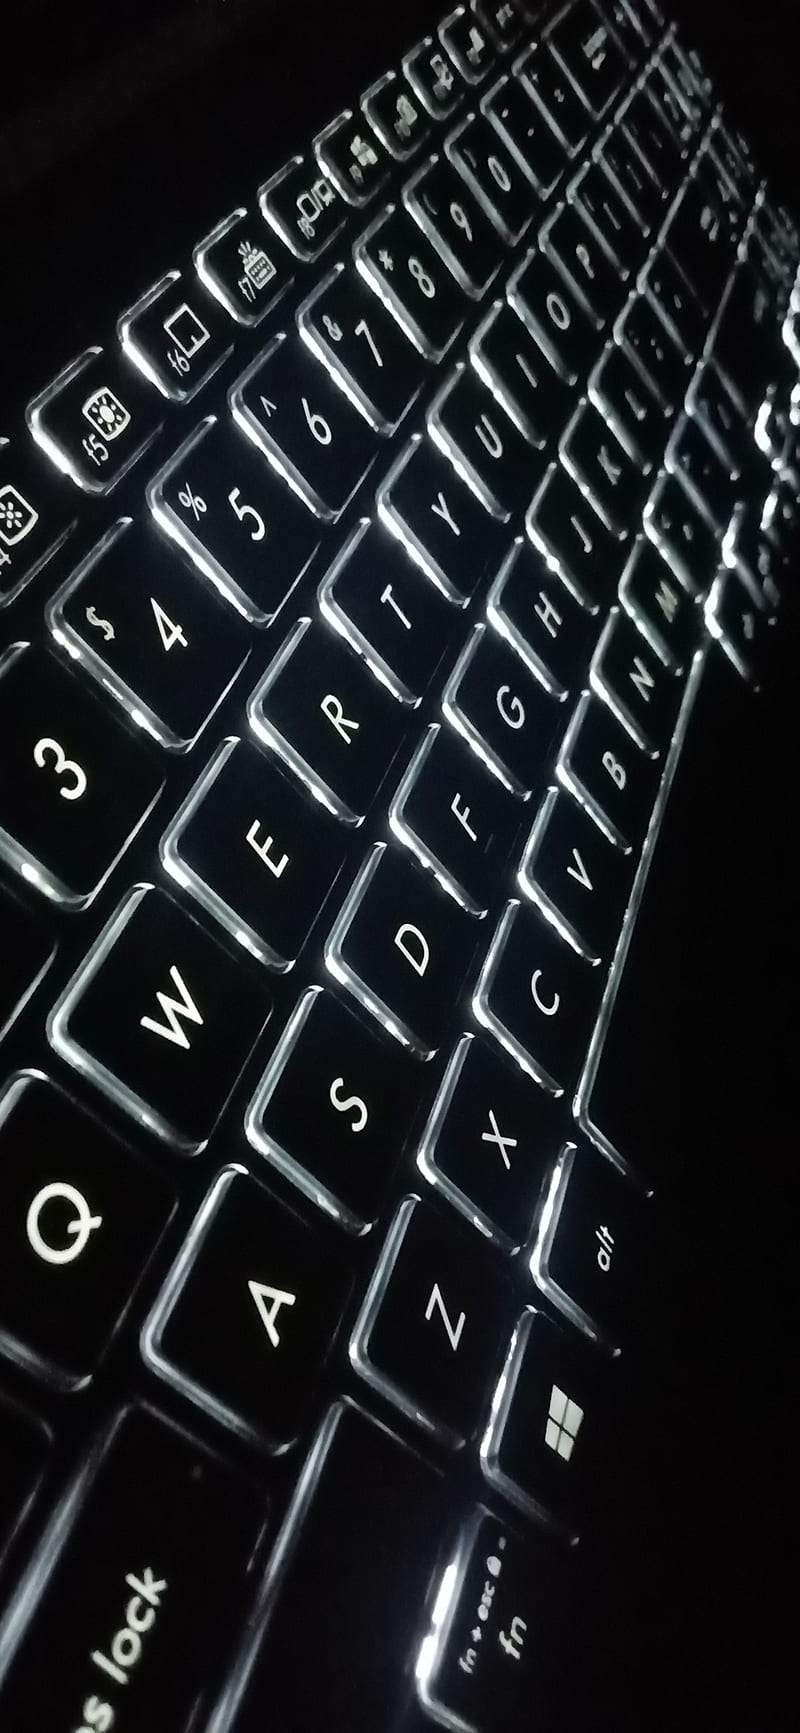 3,000+ Computer Keyboard Pictures for Free [HD] - Pixabay